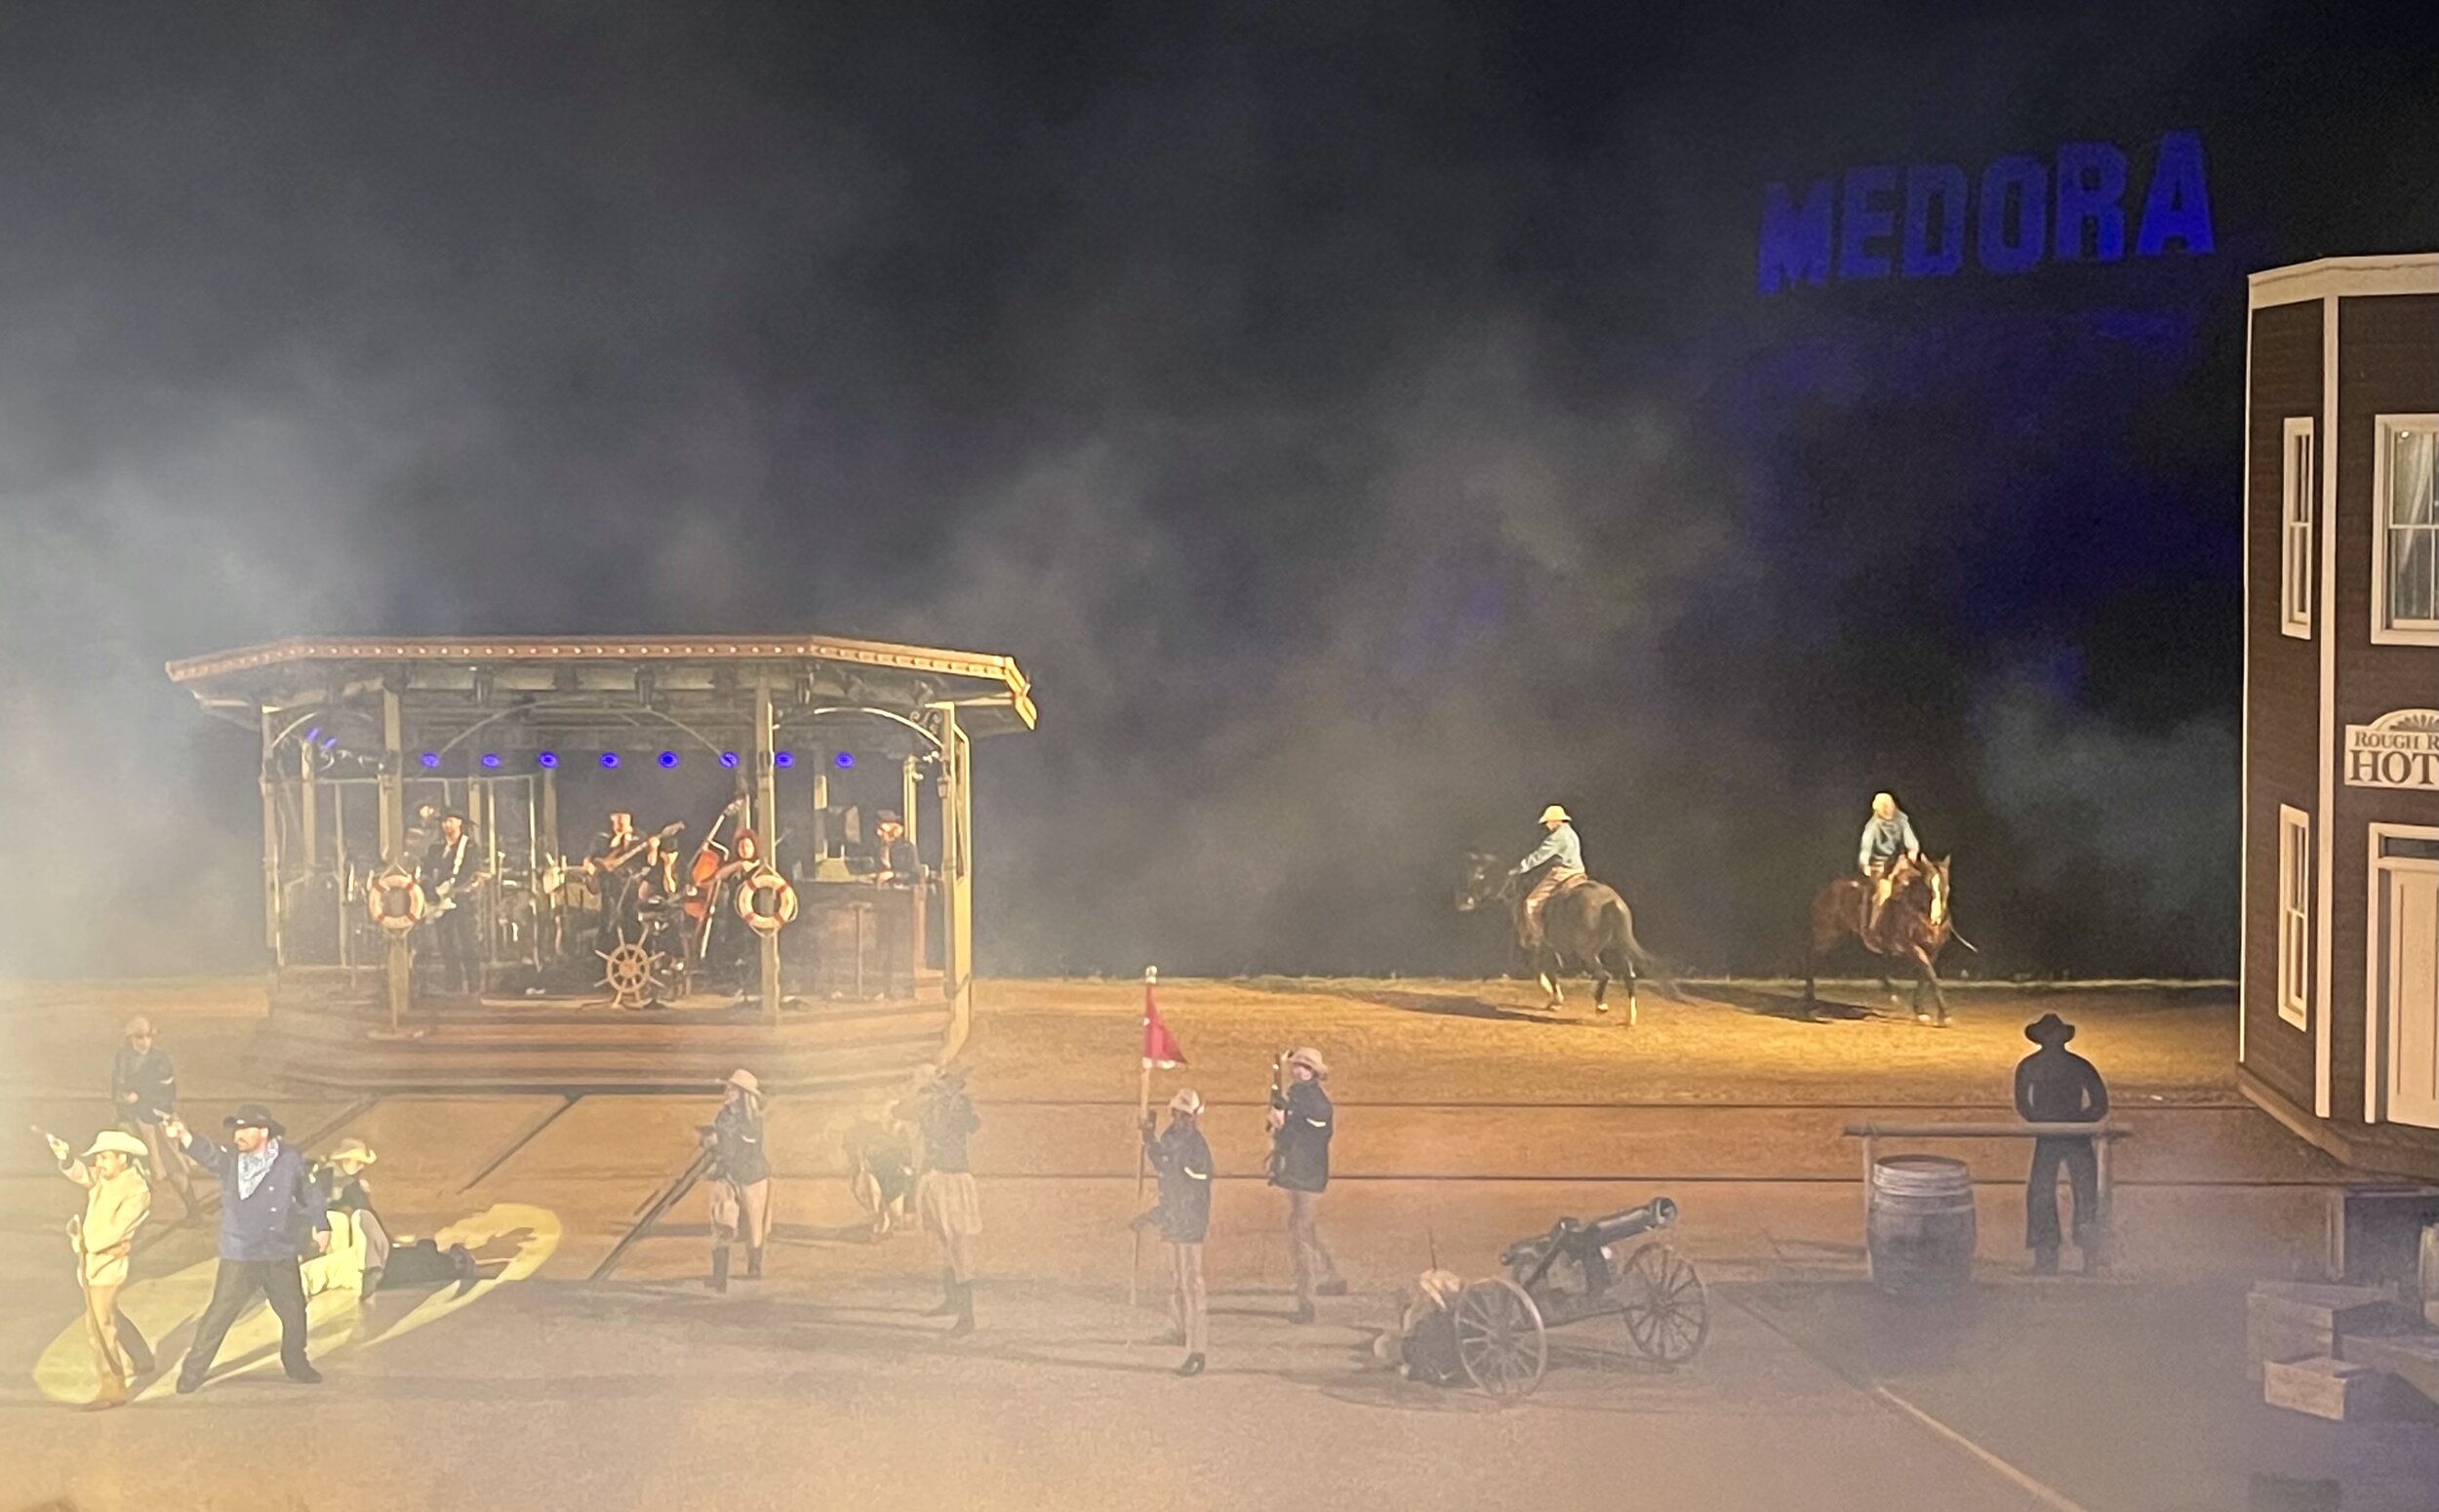  The elaborate stage changes were an amazing aspect of the show. The theatrical "town" buildings could slide back and forth on rails for various scenes and skits, with an actual dirt trail behind the stage, where real horses can be a part of the show